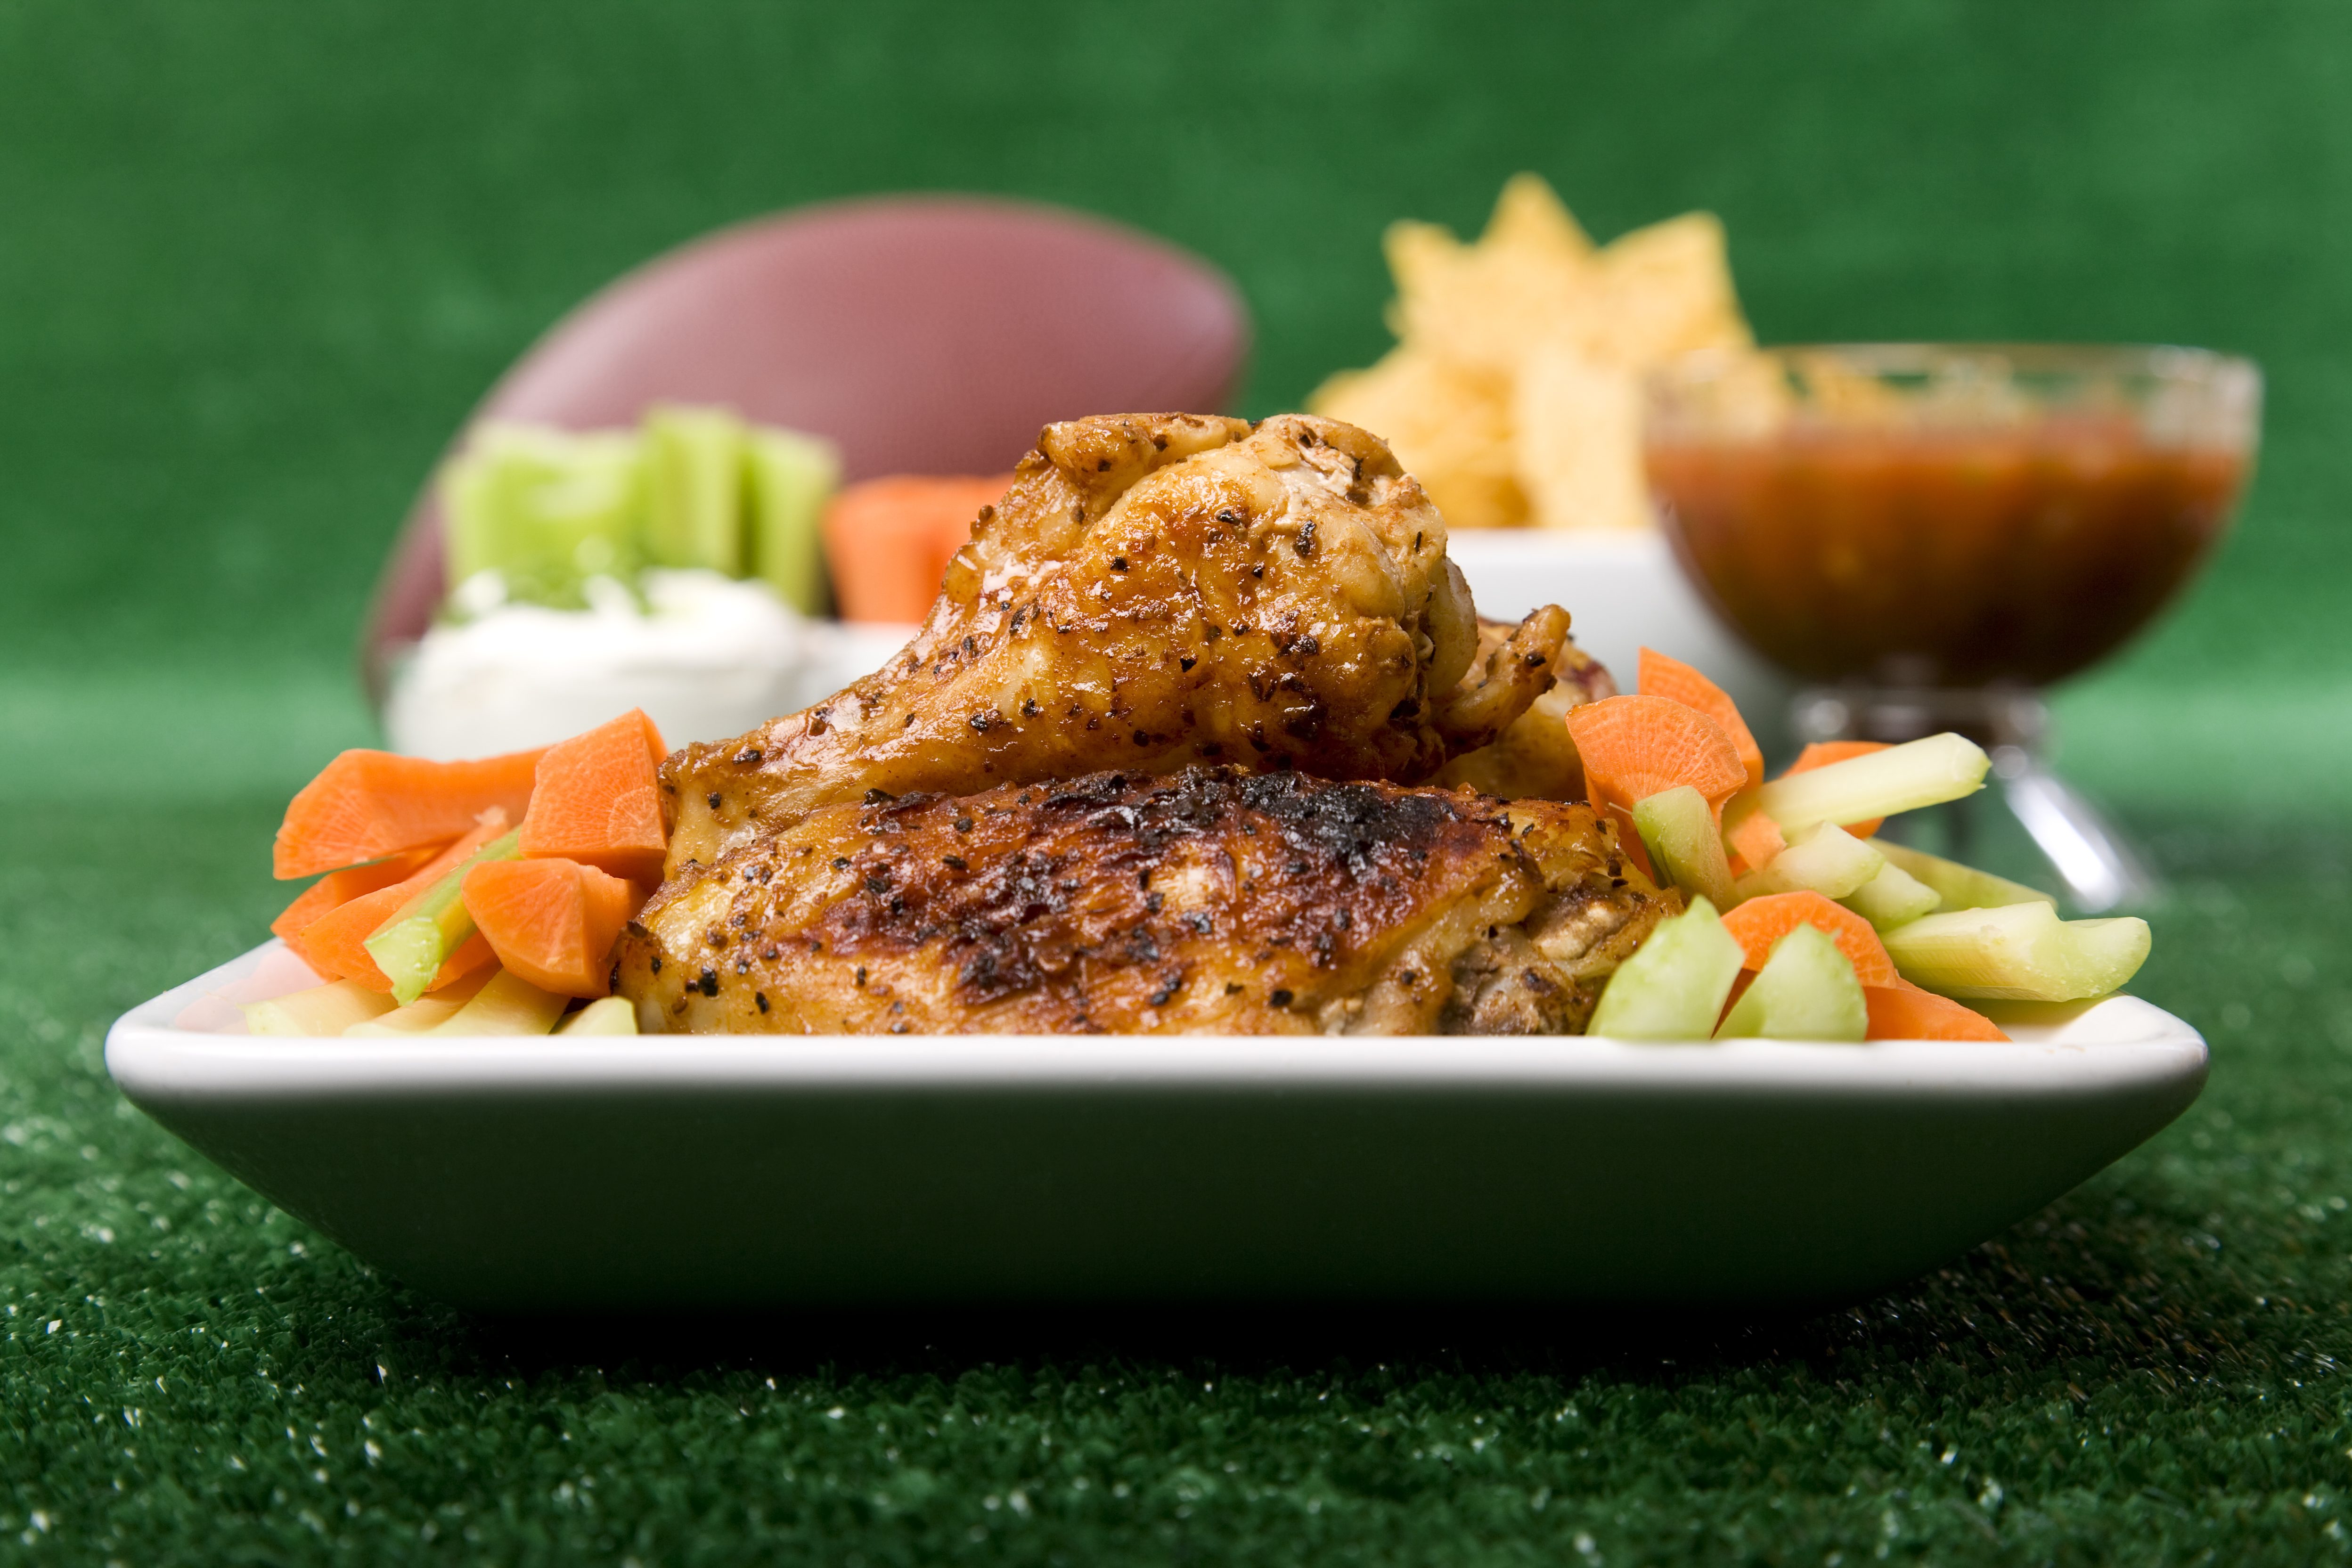 Avoid a Food Safety Penalty This Super Bowl